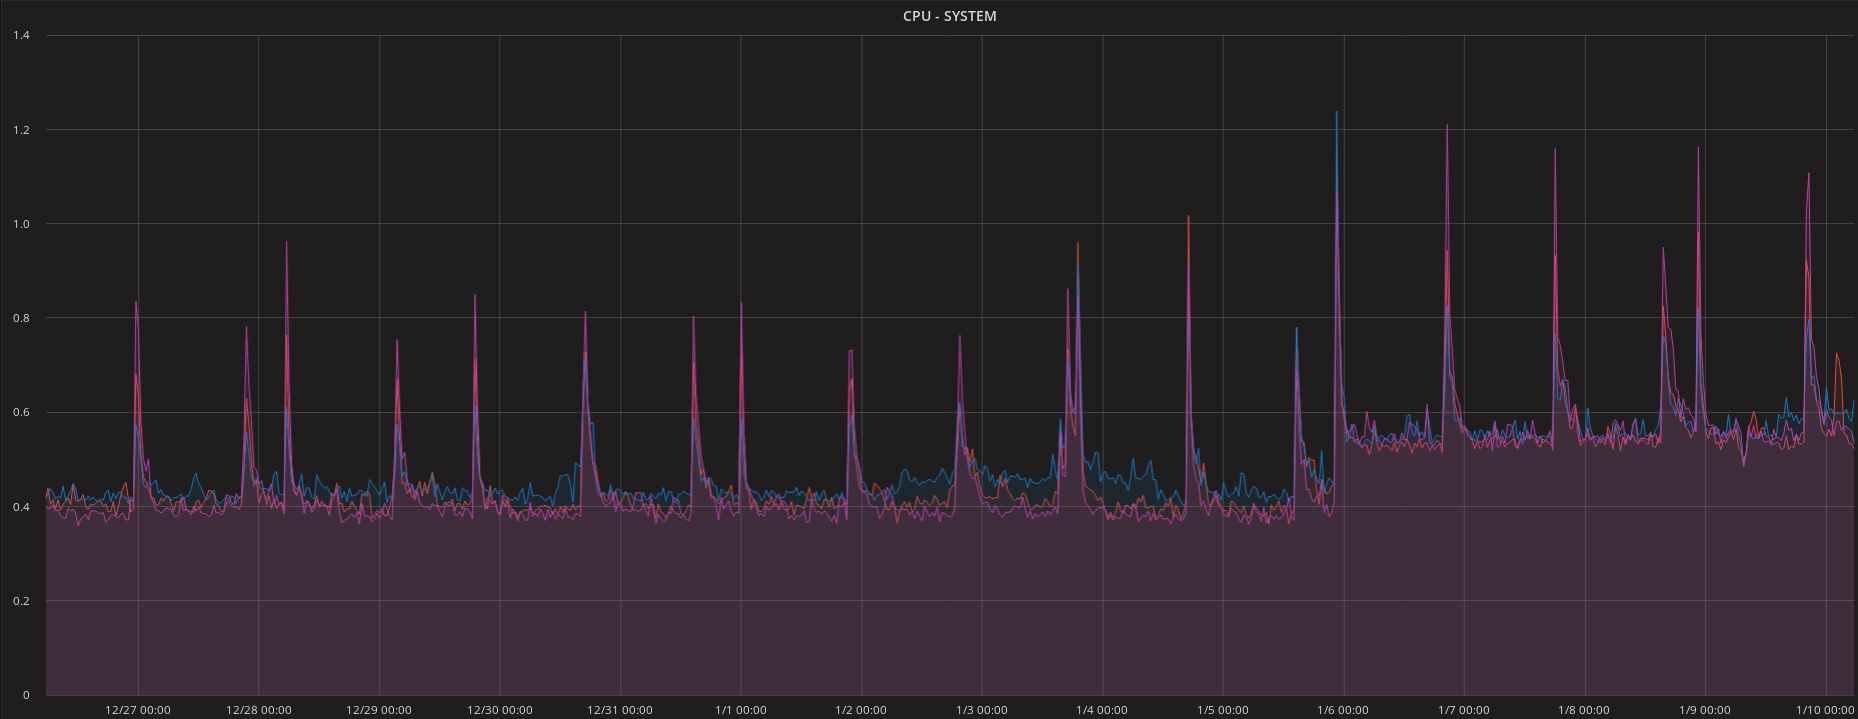 CPU load before and after KPTI patch on AdwCleaner storage backend.